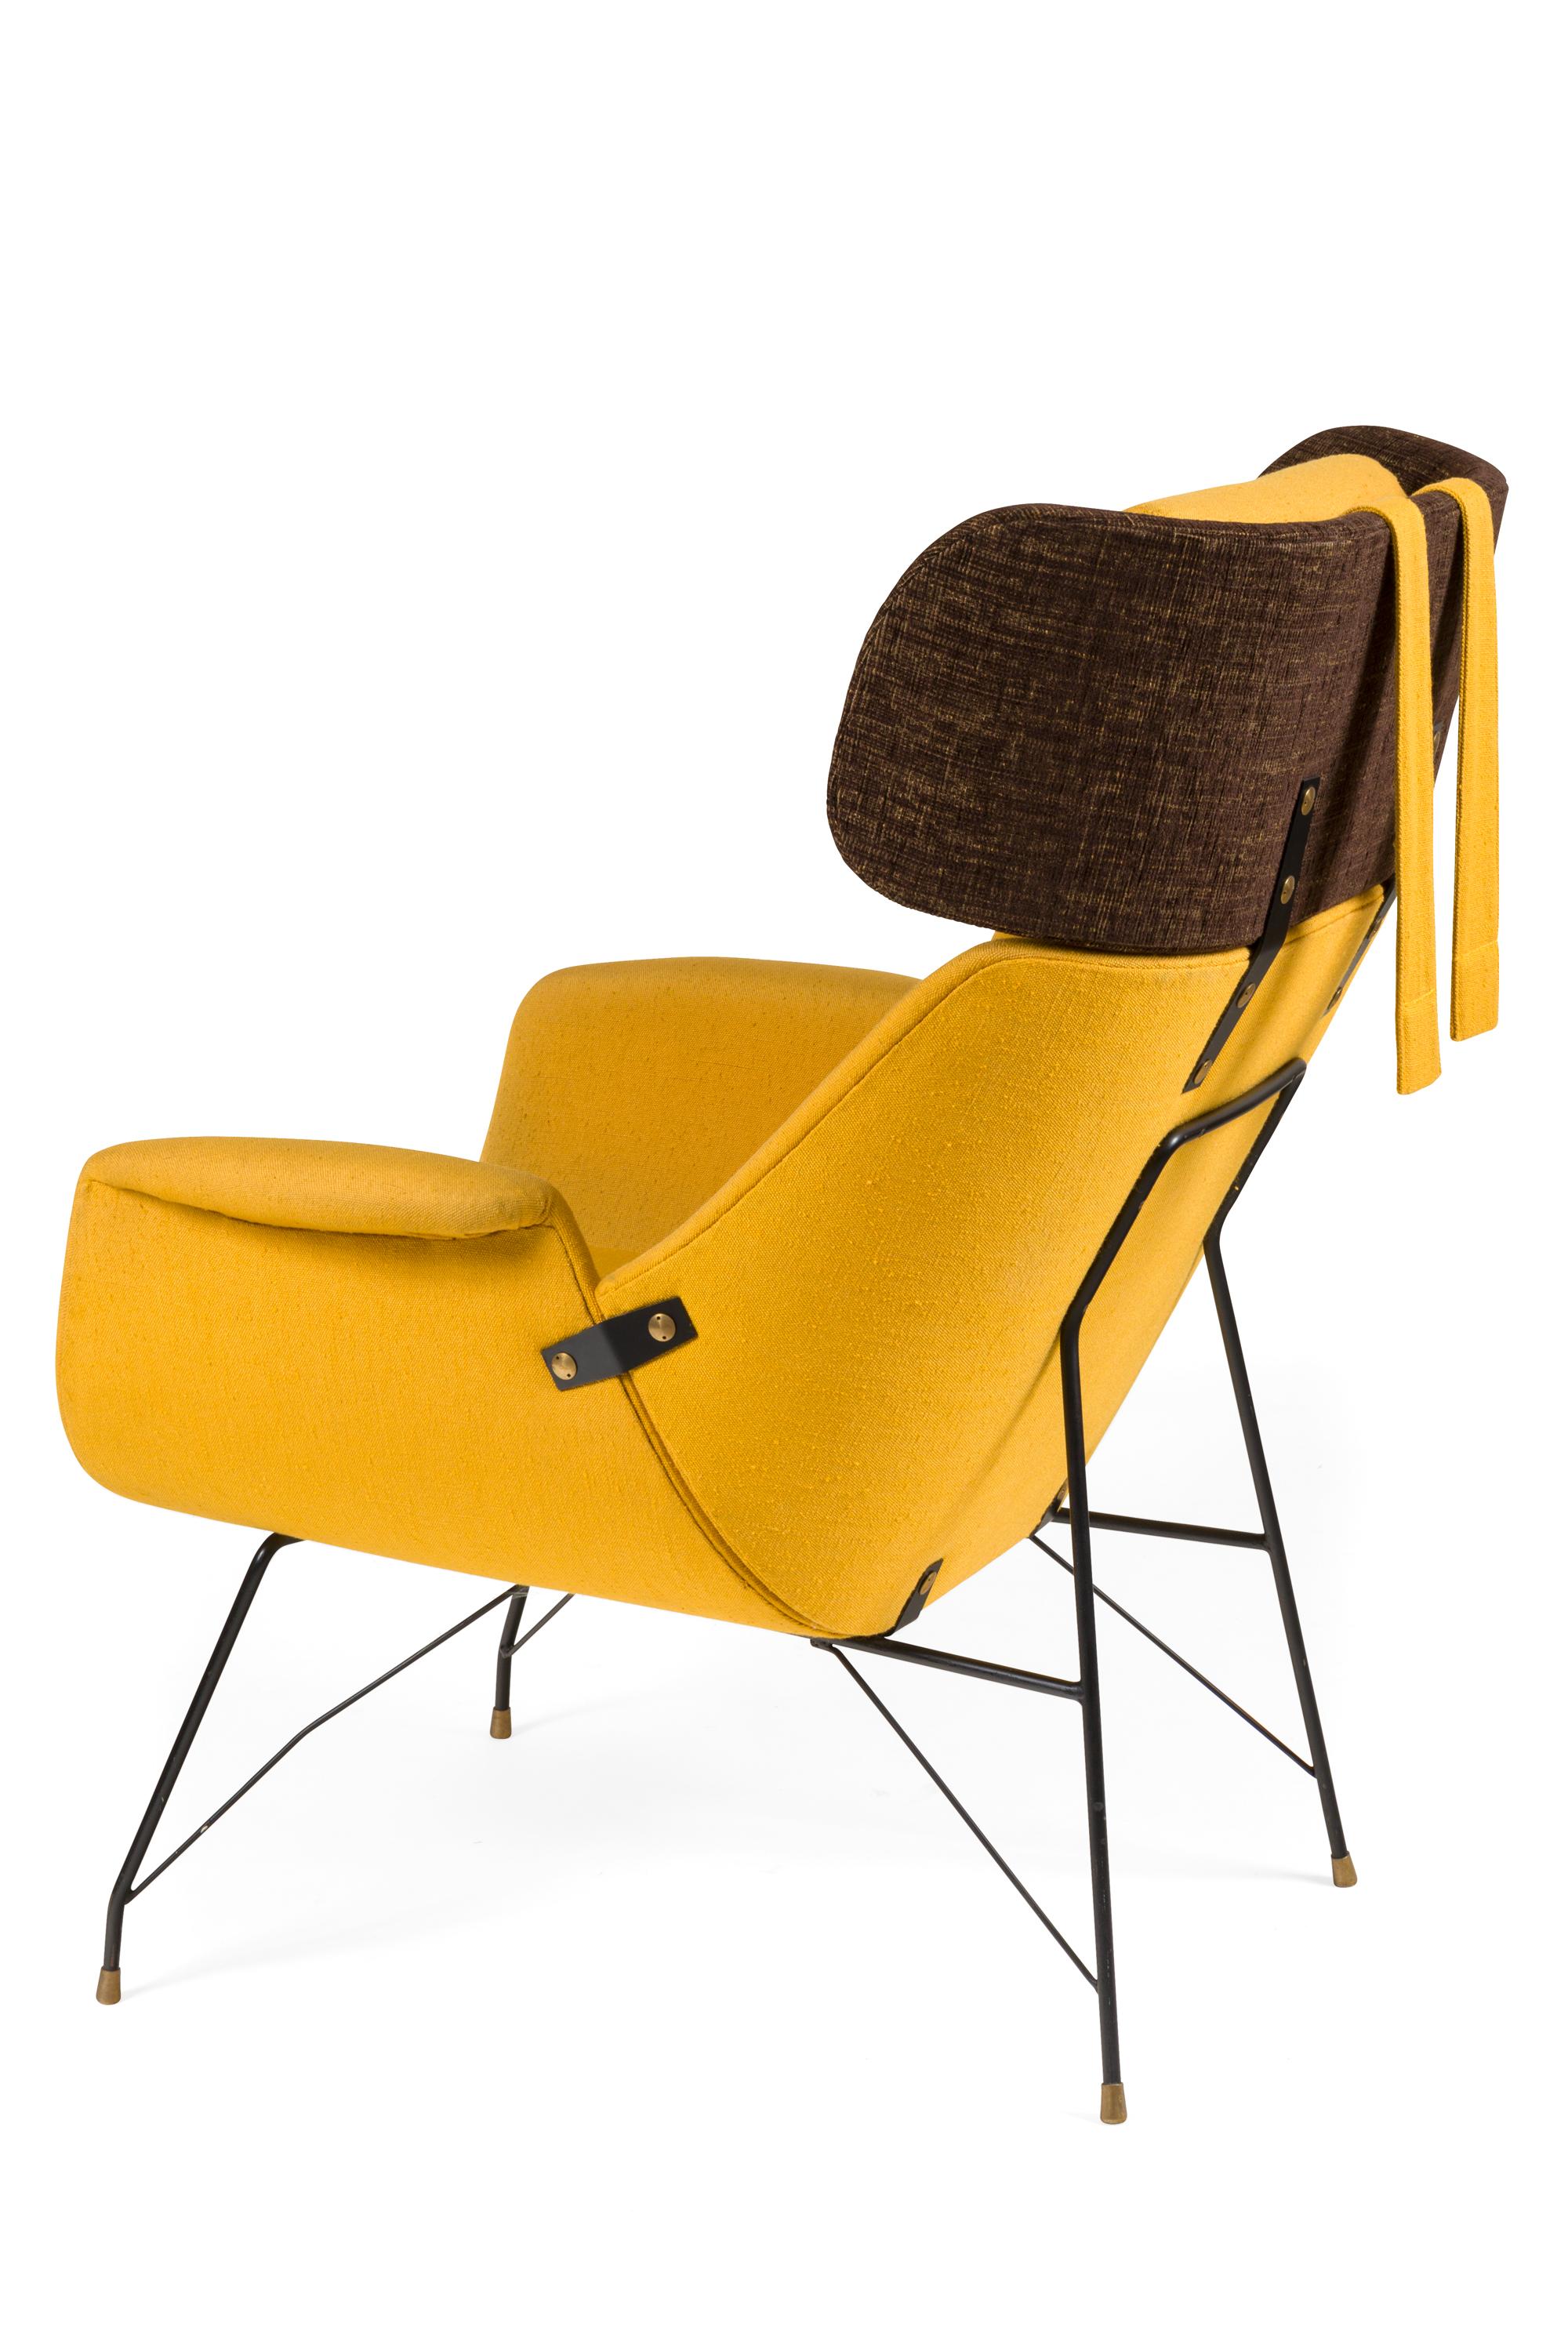 Italian High Back Yellow Lounge Chairs by Augusto Bozzi for Saporiti, Italy 1950s